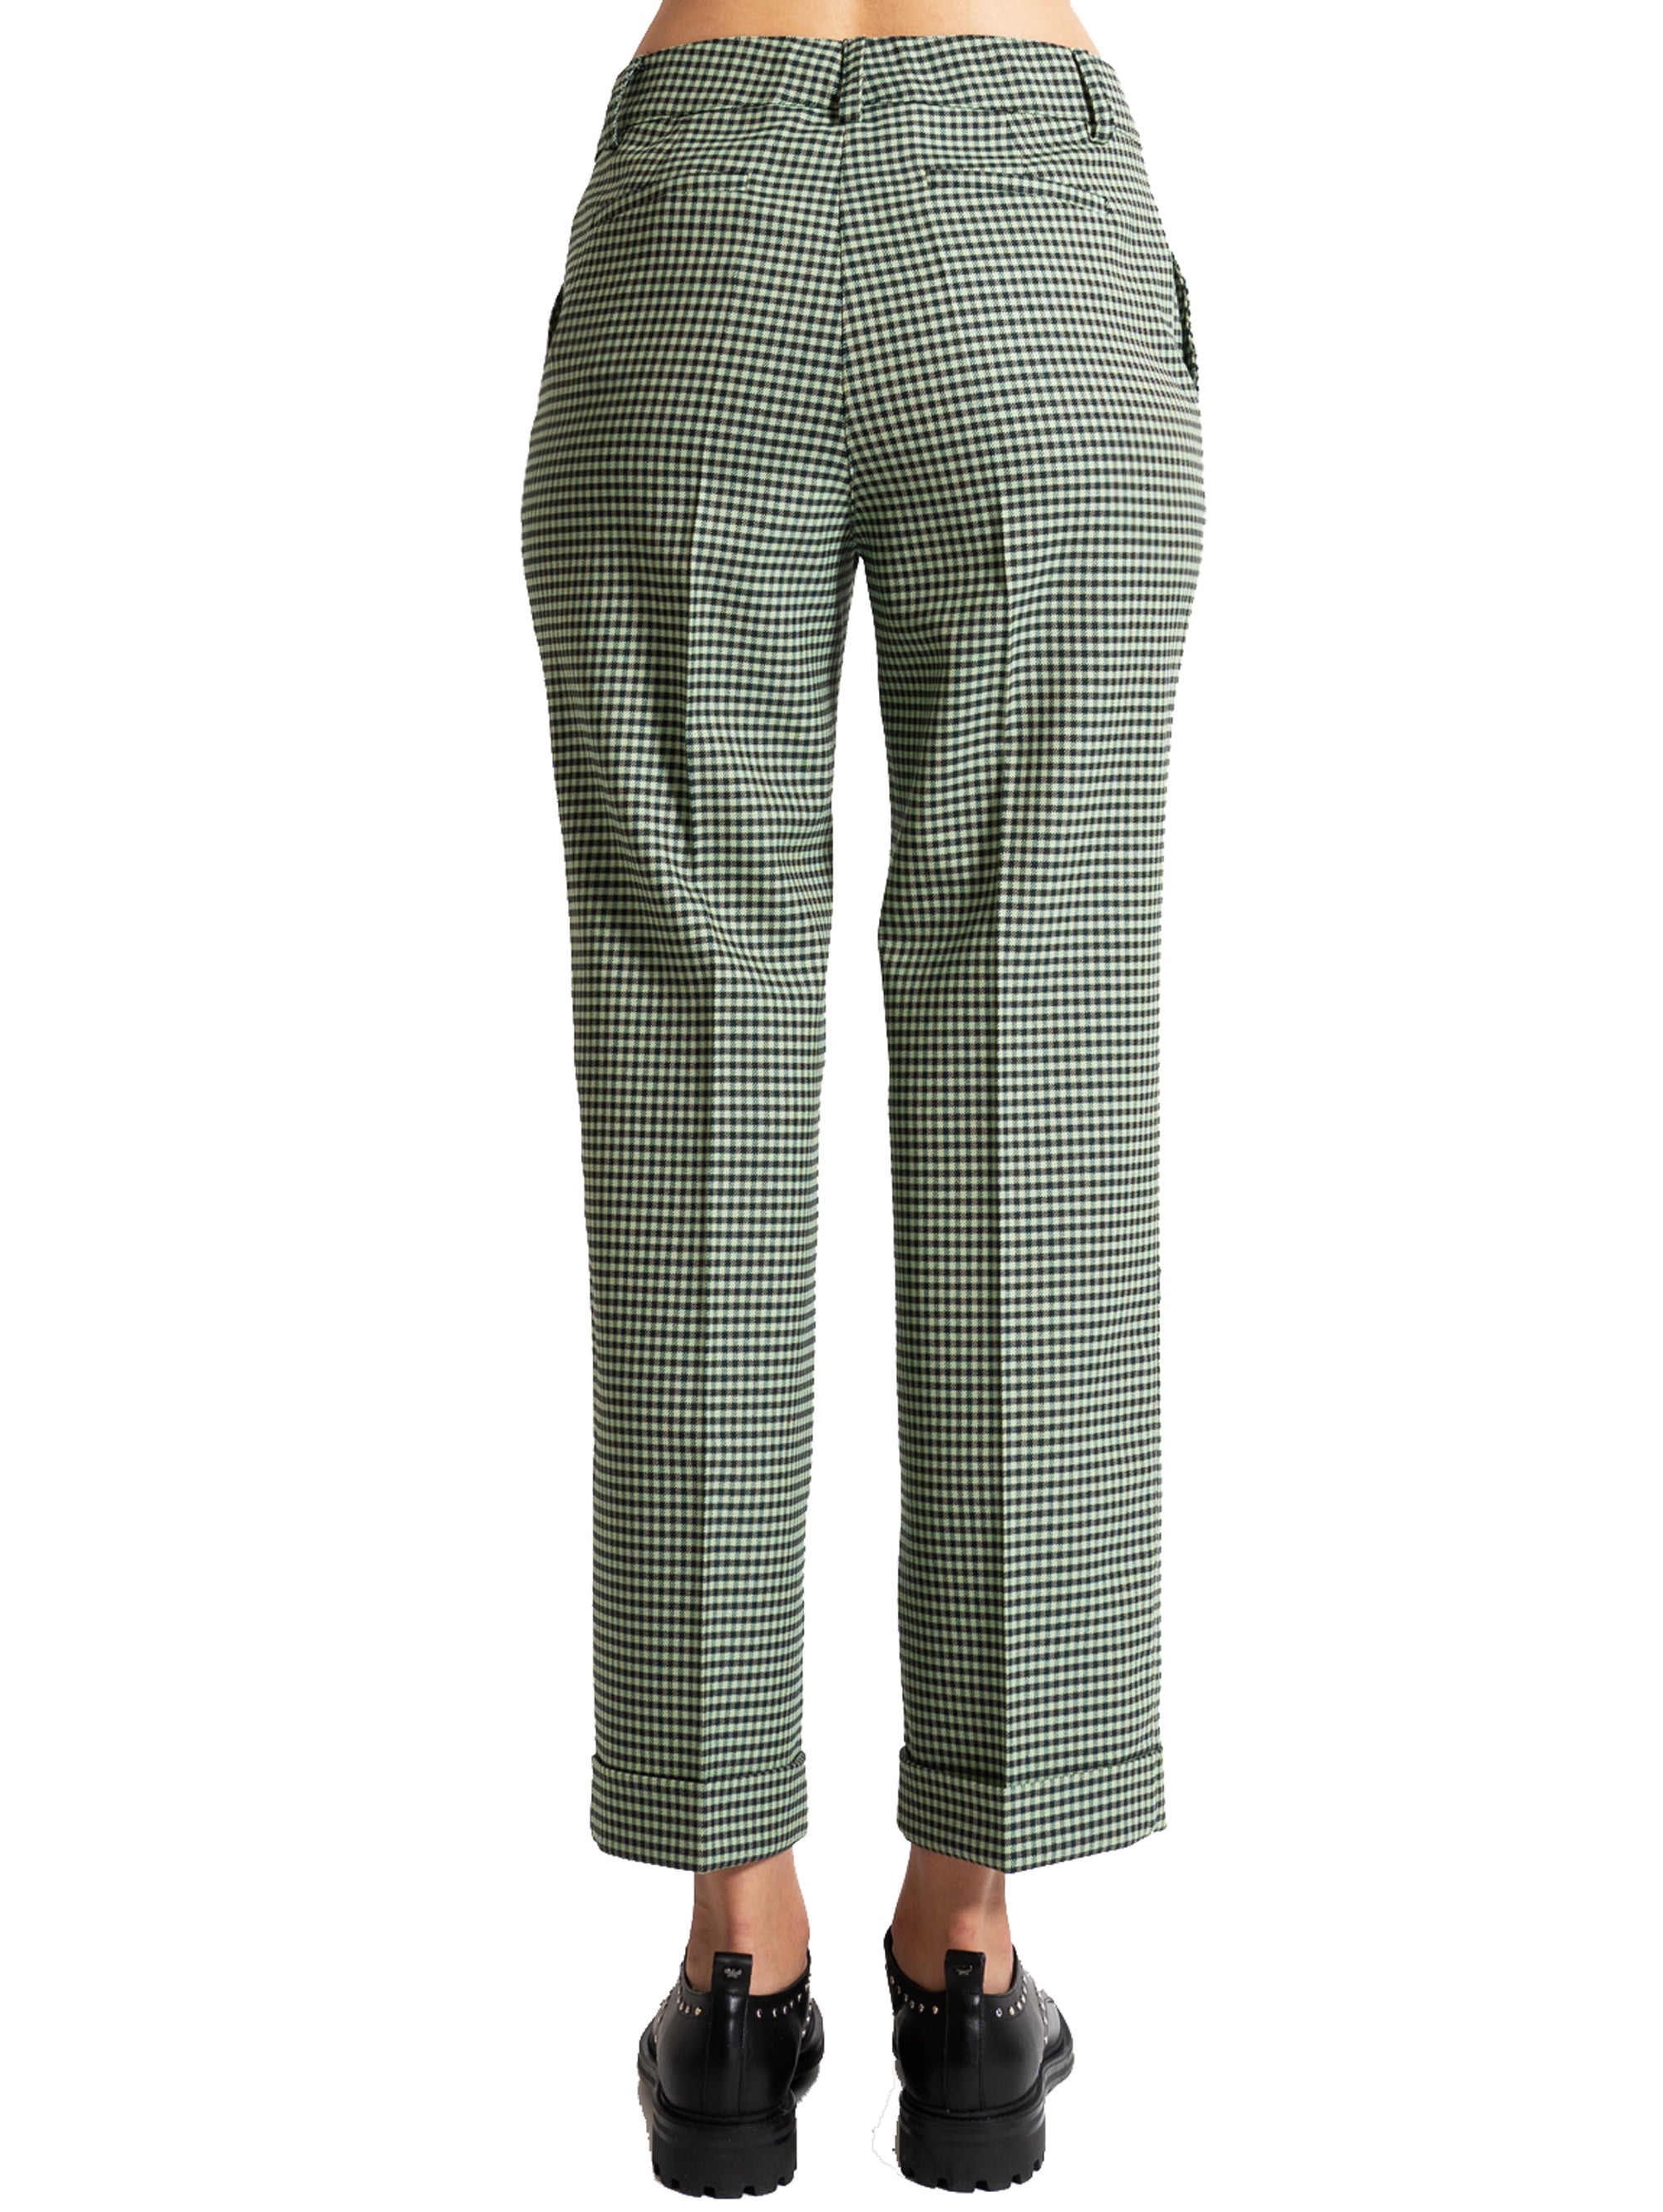 Green Houndstooth Trousers